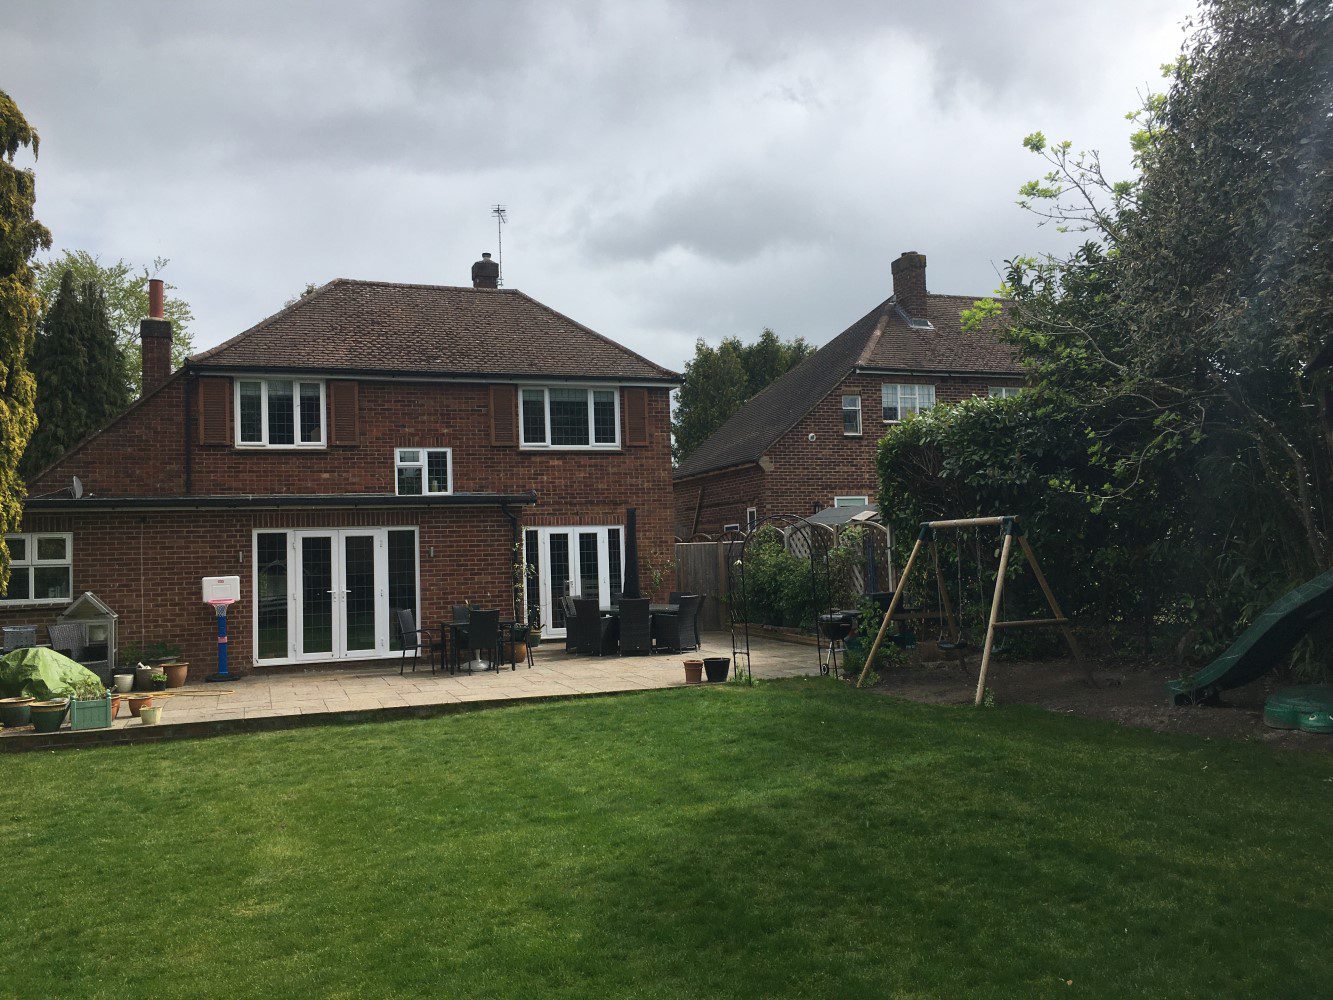 rear of 5 bedroom Georgian style house before remodelling